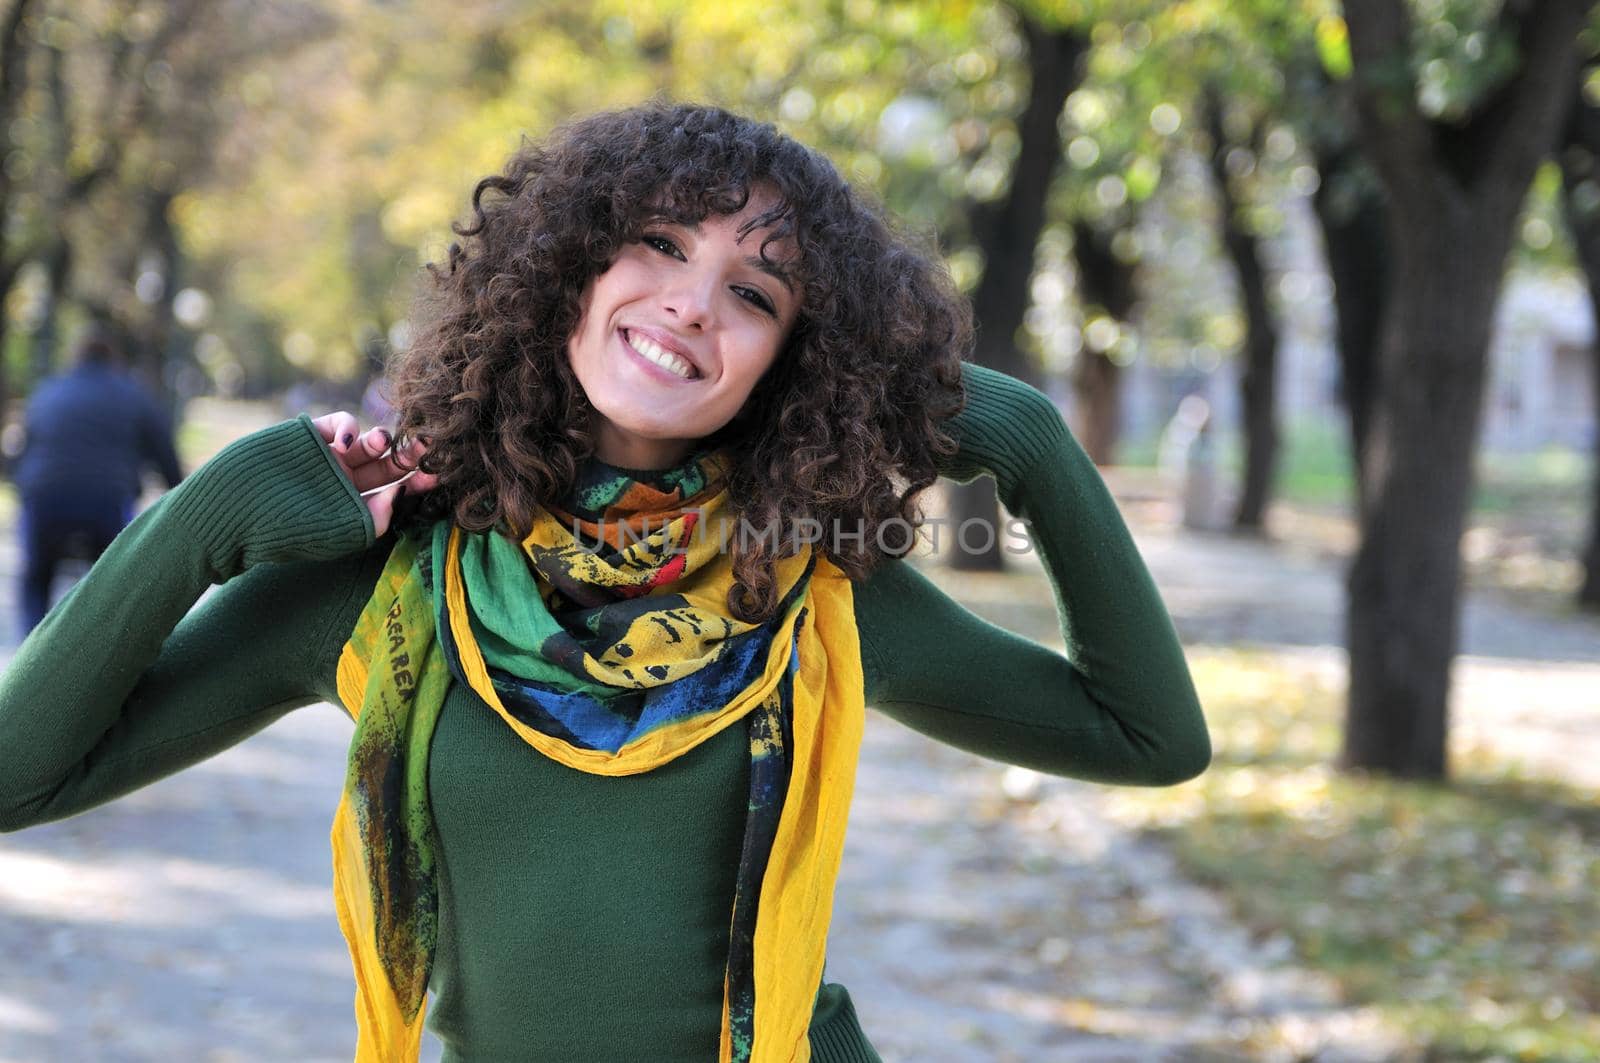 brunette Cute young woman with colorful scarf smiling outdoors in nature
